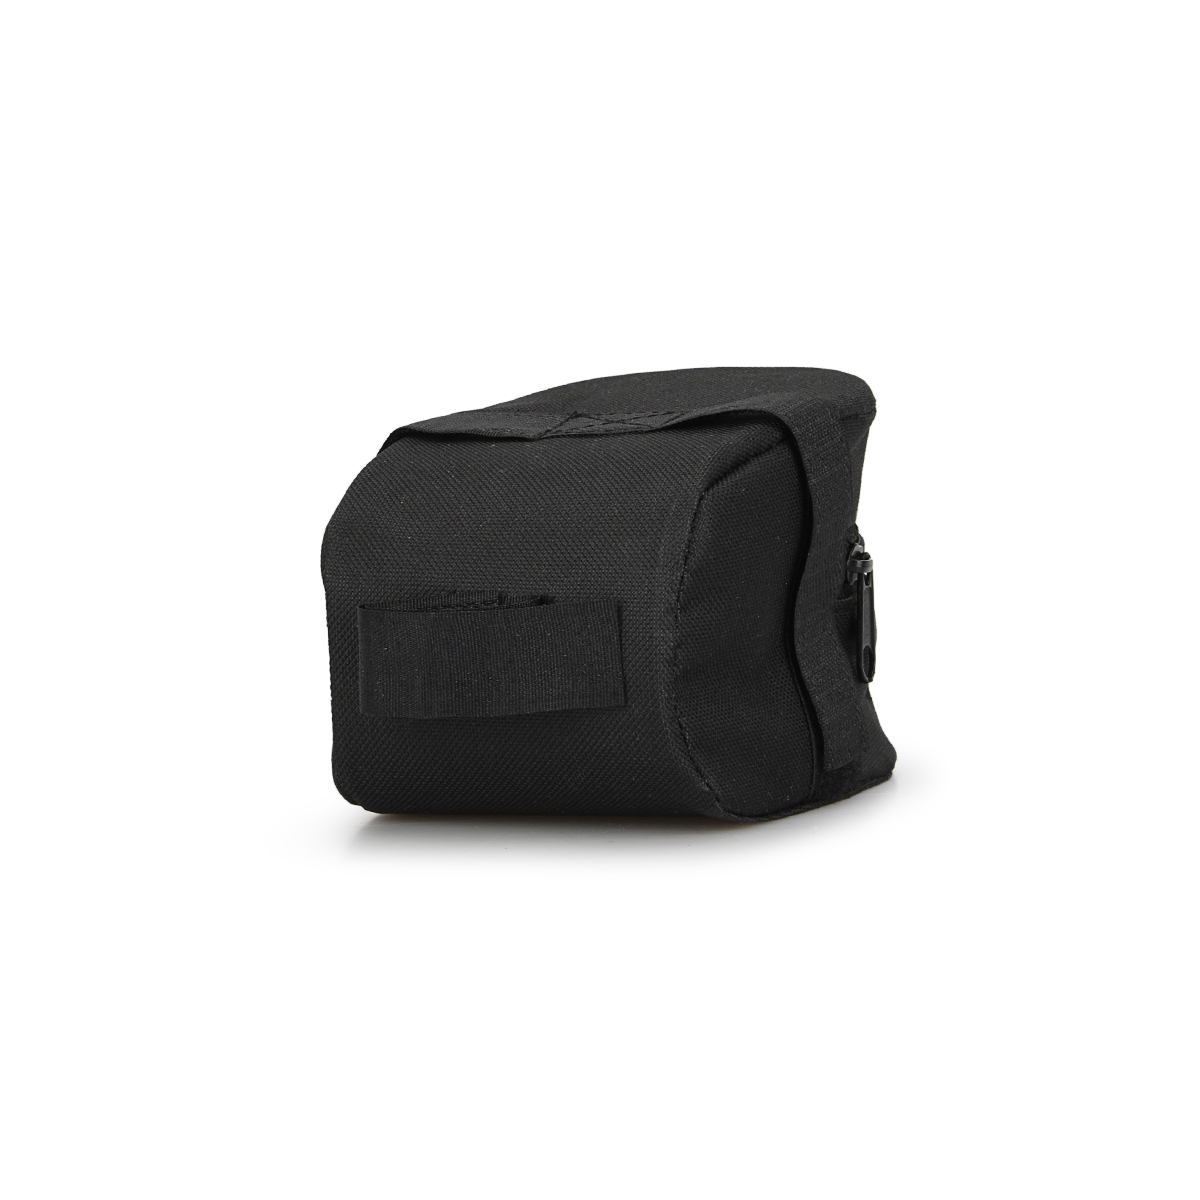 Bolso Fire Bird Bajo Asiento,  image number null